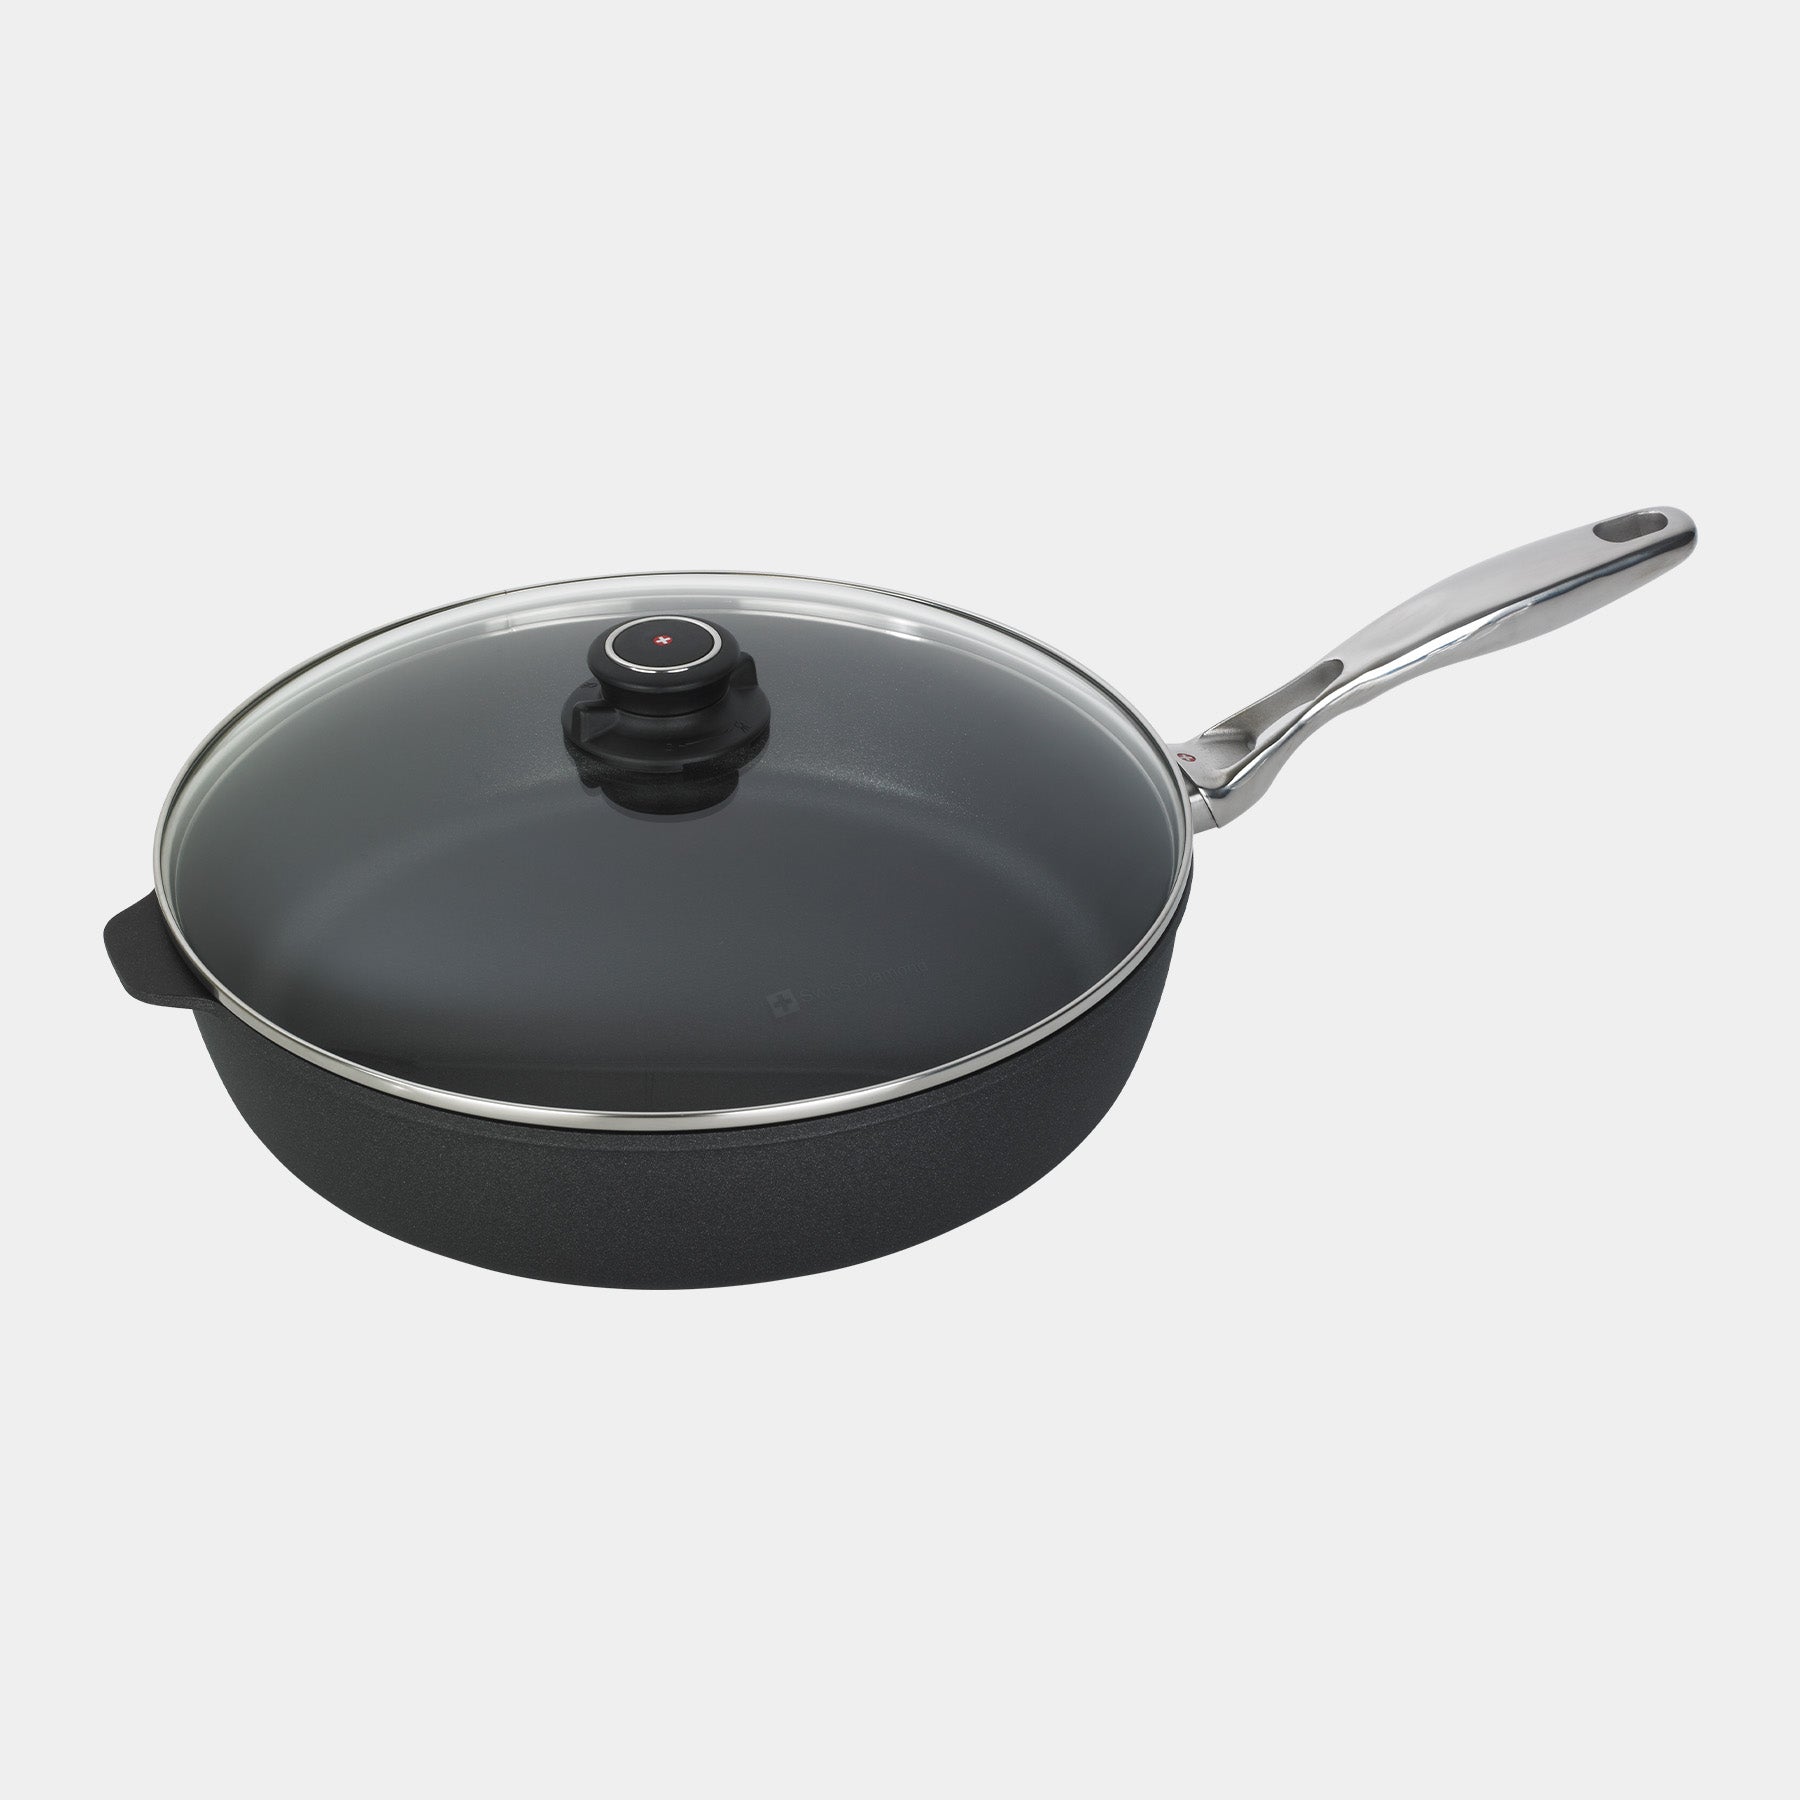 XD Nonstick 5.8 qt Saute Pan with Glass Lid